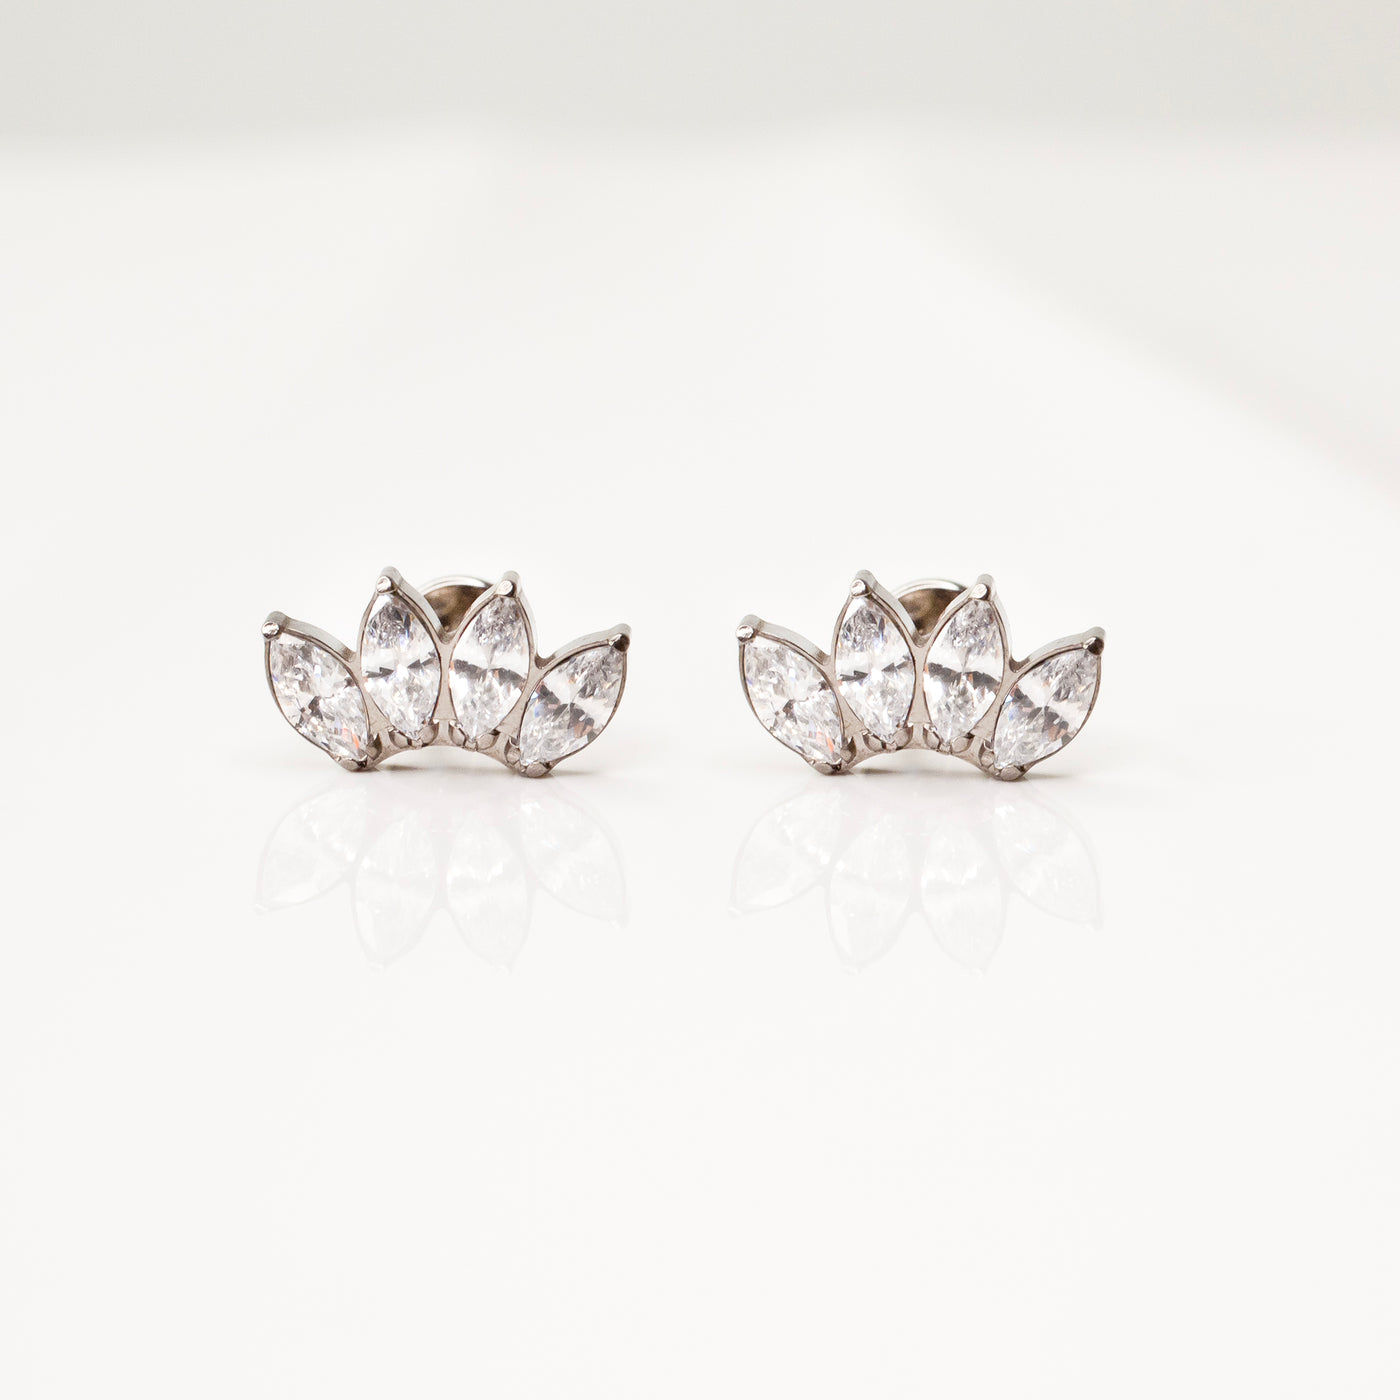 Marquise Arc Flat Back Earrings - Four Inlaid Crystals